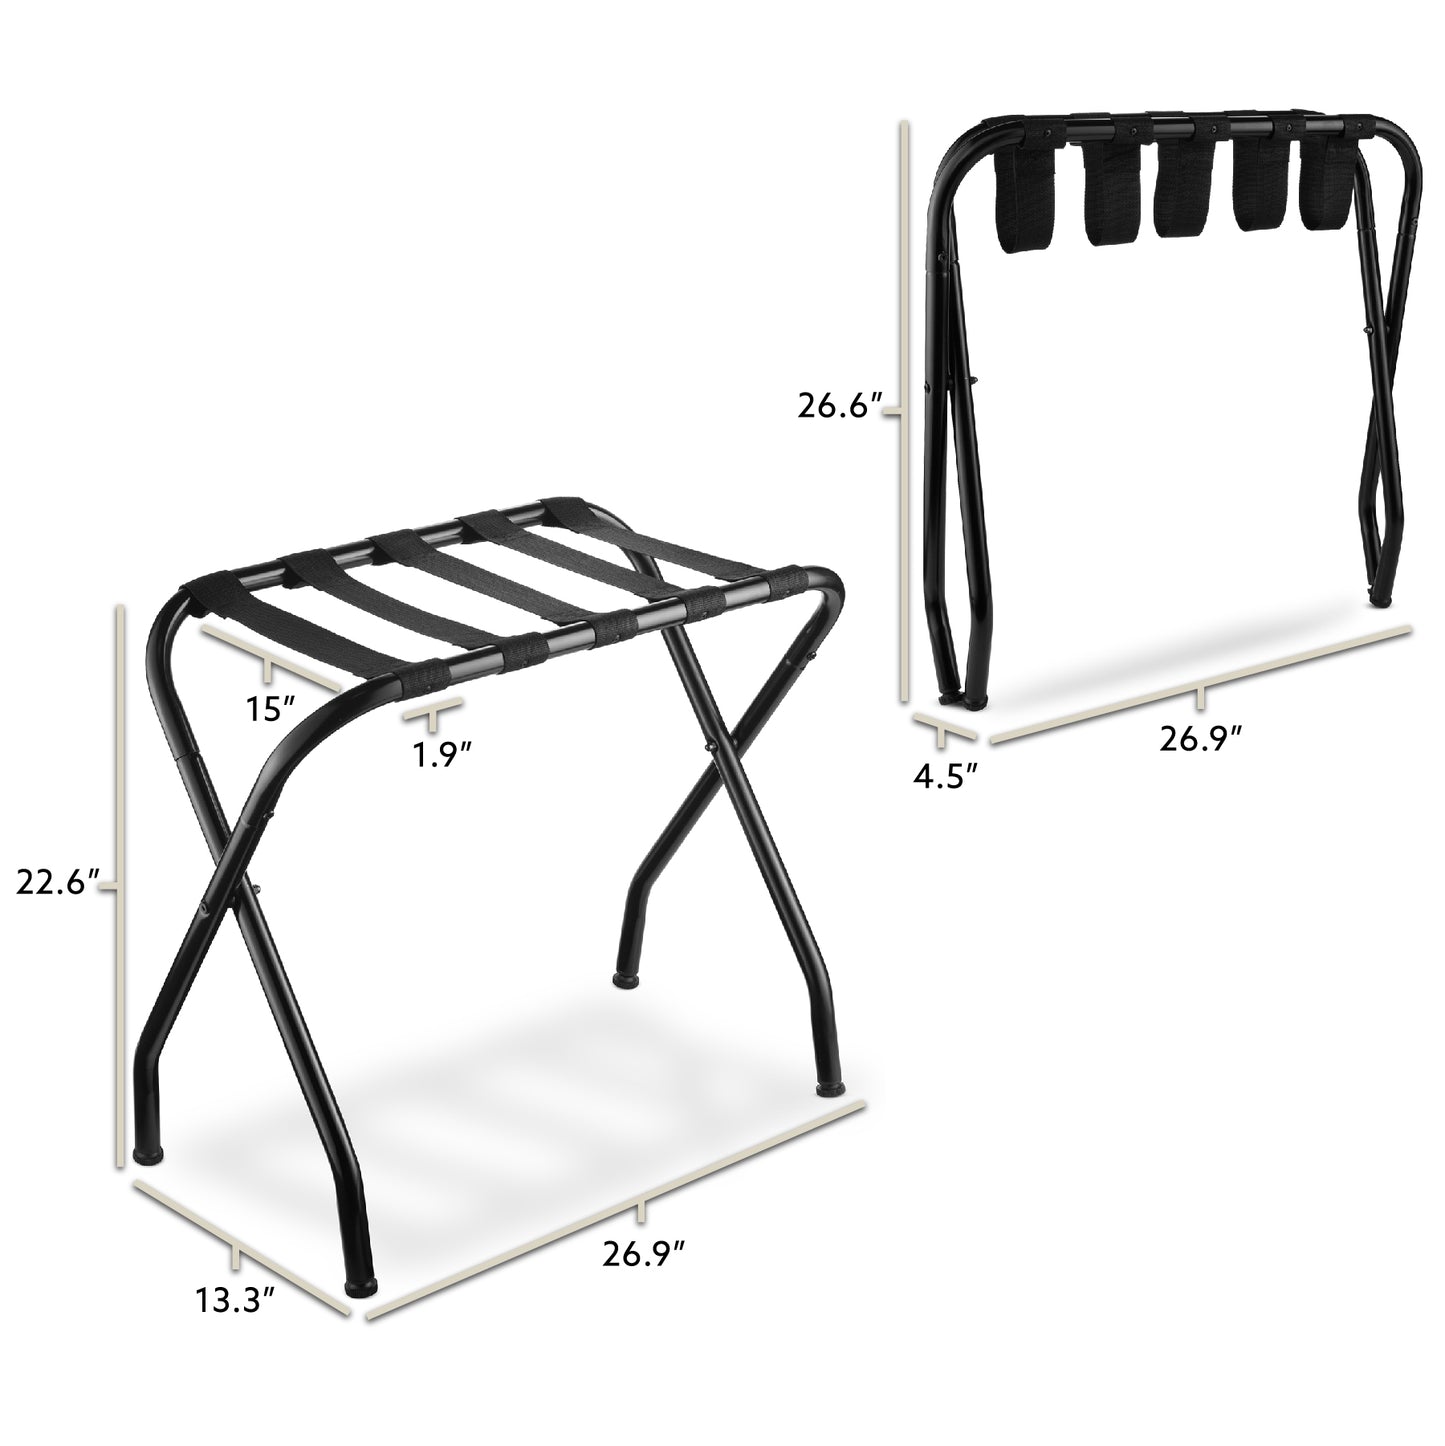 Bartnelli 2-Pack Folding Luggage Rack Collapsible Metal Suitcase Stand with Durable Black Nylon Straps- for Bedroom, Guest Room, or Hotel (BLACK STEEL)